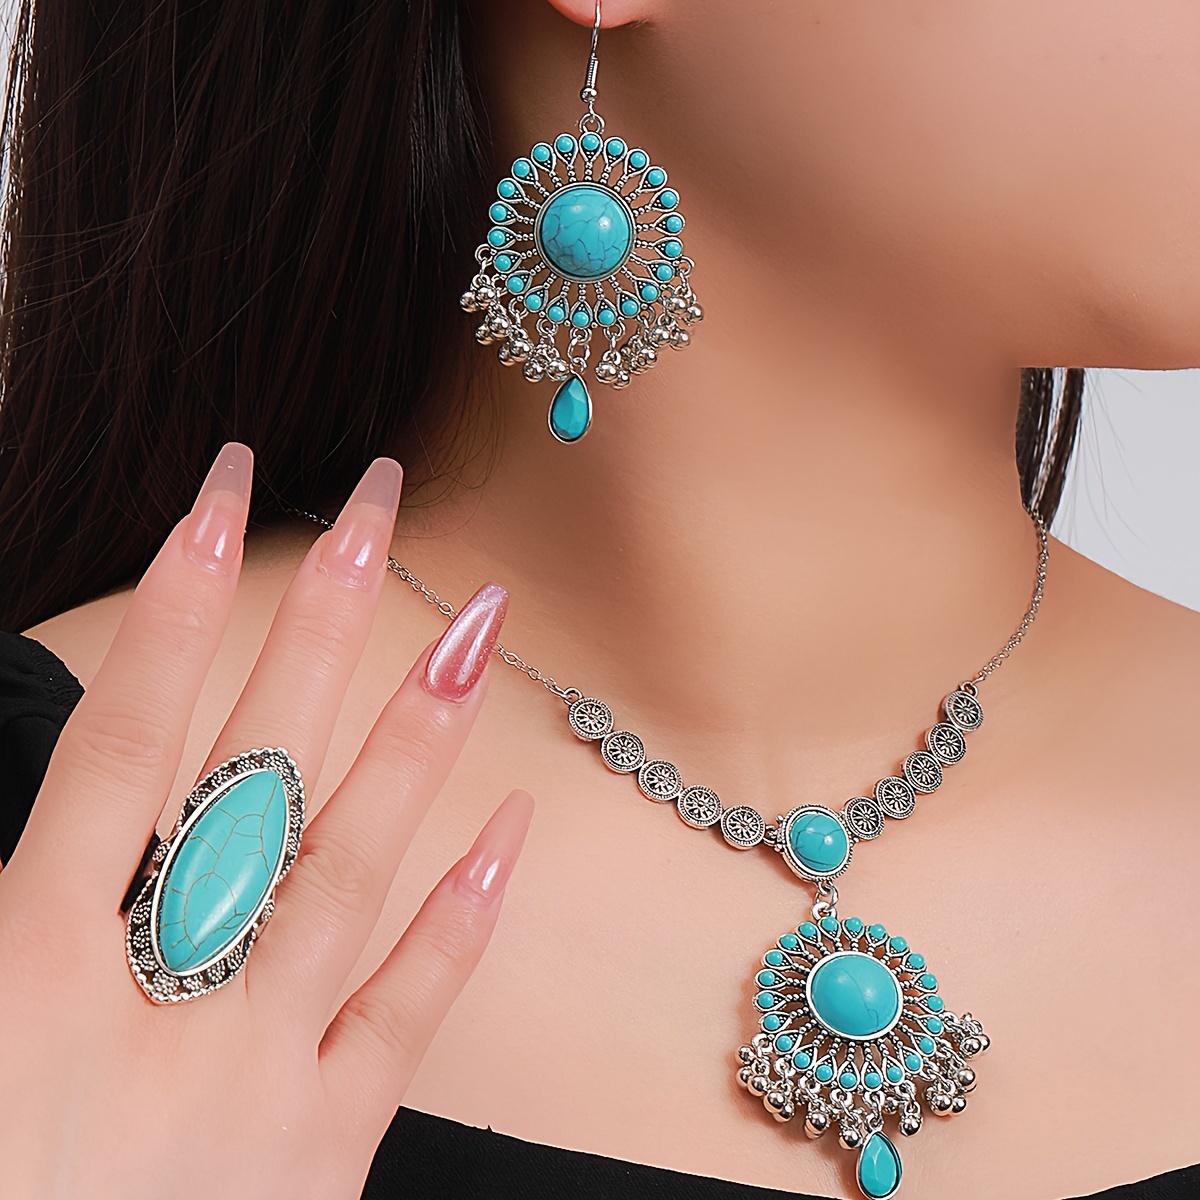 

Vintage Turquoise Jewelry Set - Timeless Elegance With Handcrafted Necklace, Earrings & Ring - Bohemian Charm For A Statement Look